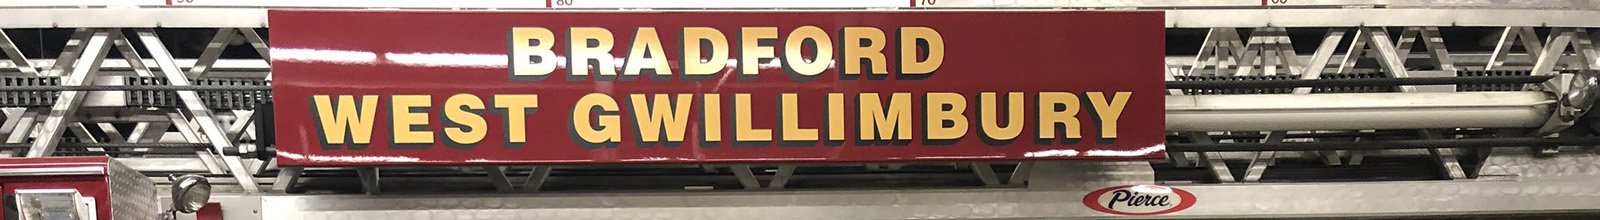 Up close photo of sign on BWG fire truck, reading "Bradford West Gwillimbury"